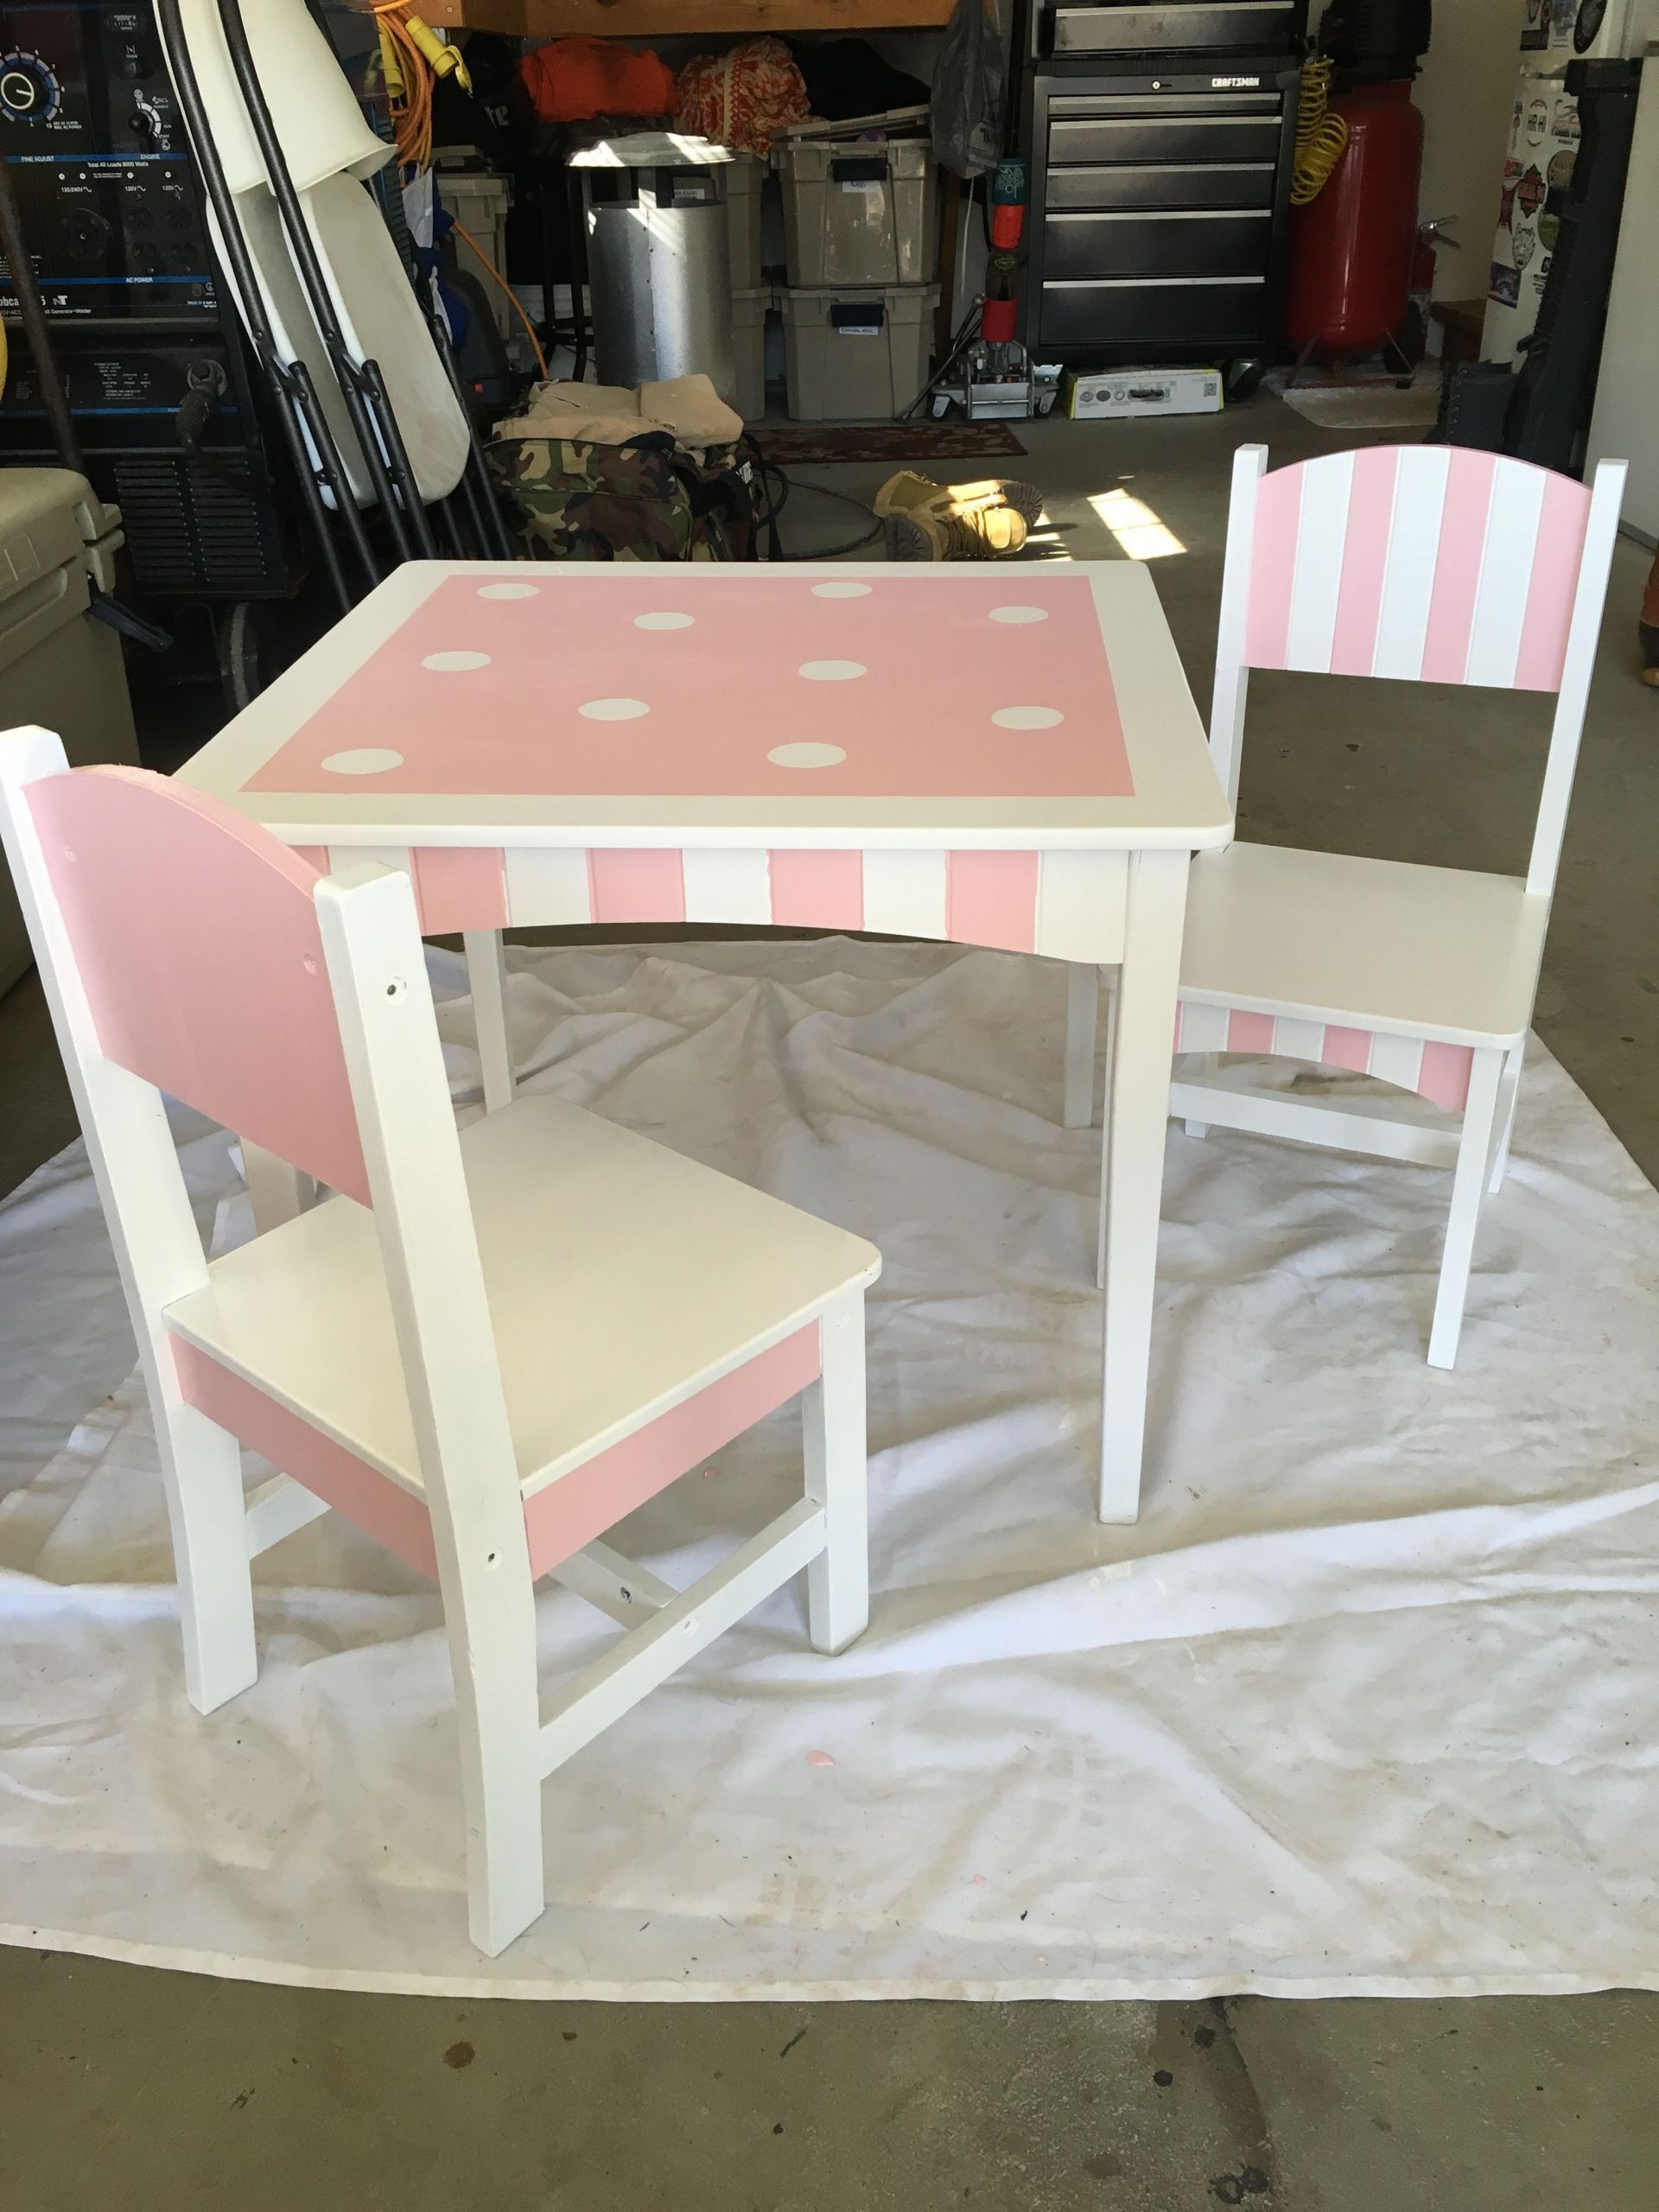 DIY Toddler Table And Chairs
 Old toddler kids table and chairs pink and white diy